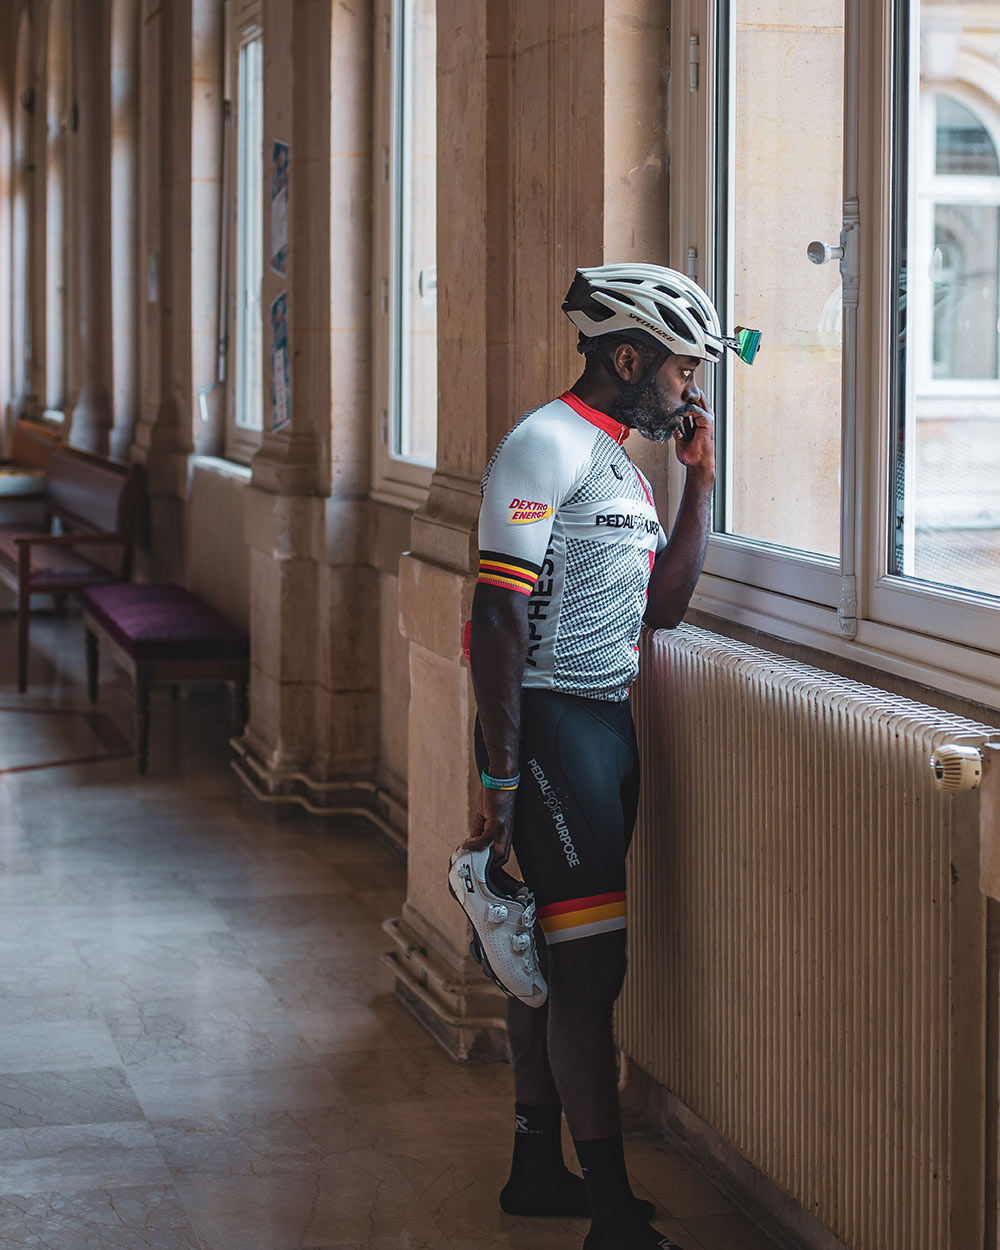 Muyambi holds a phone to his head in one hand and his cycling shoes in the other while looking out of one of the many tall windows in a long brick hallway